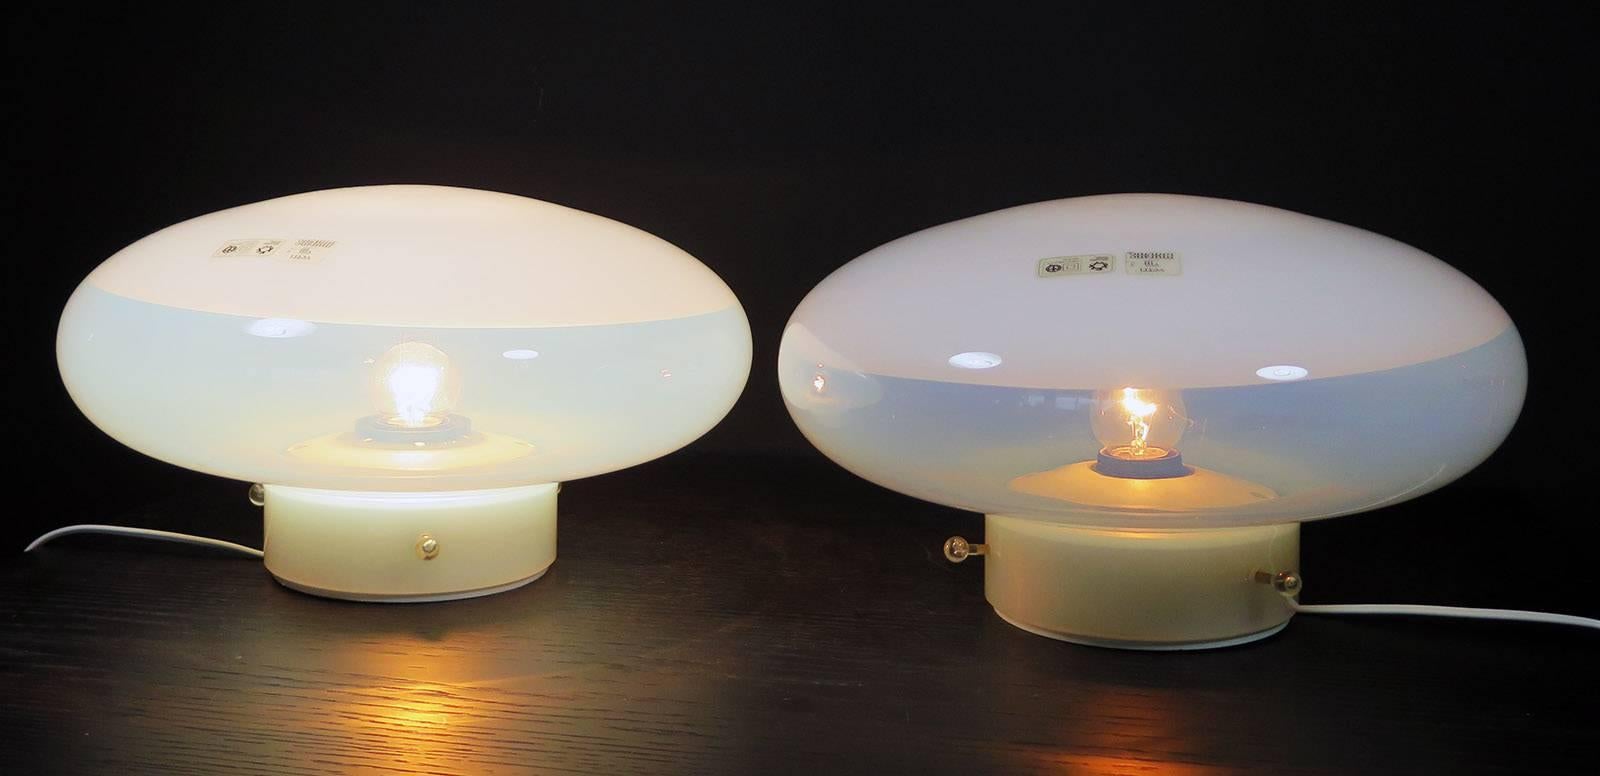 This original pair of Gill Lamp was designed by Roberto Pamio for Leucos, Italy in 1962. It consists of Murano opaline glass with a white plastic base and can be used as a ceiling lamp or as an applique. It is in excellent vintage